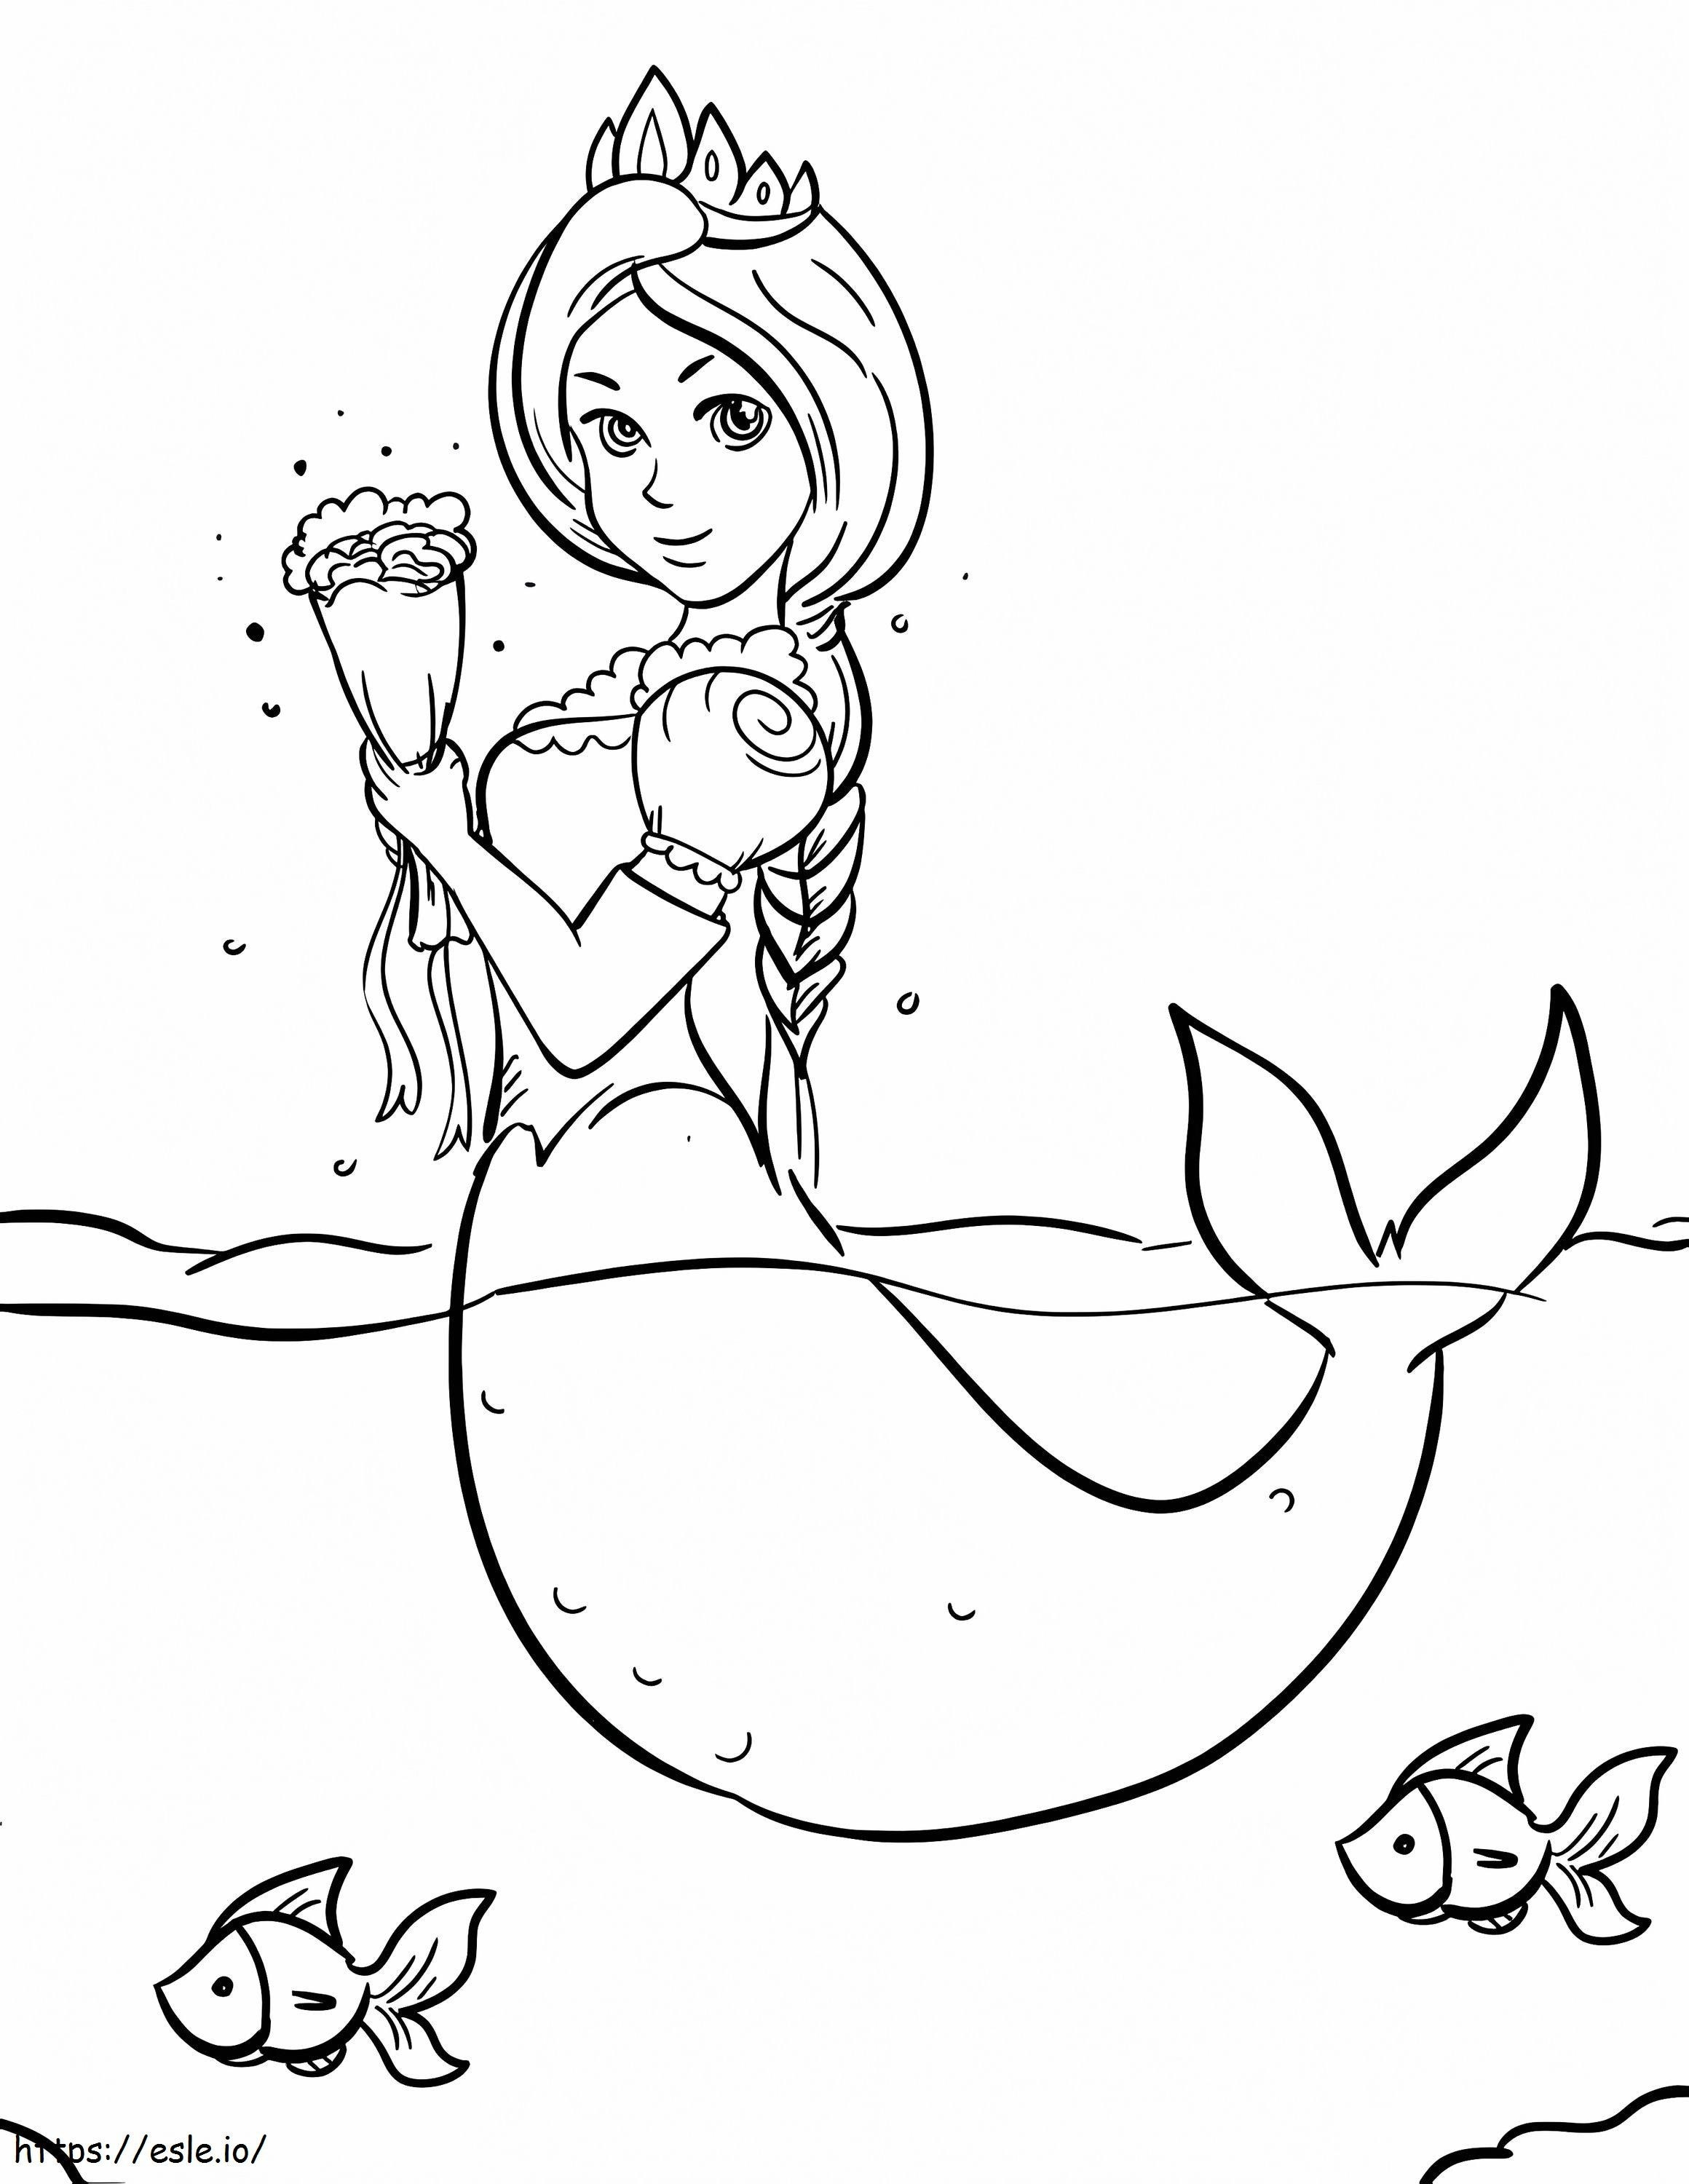 Mermaid With Bouquet Of Flowers coloring page